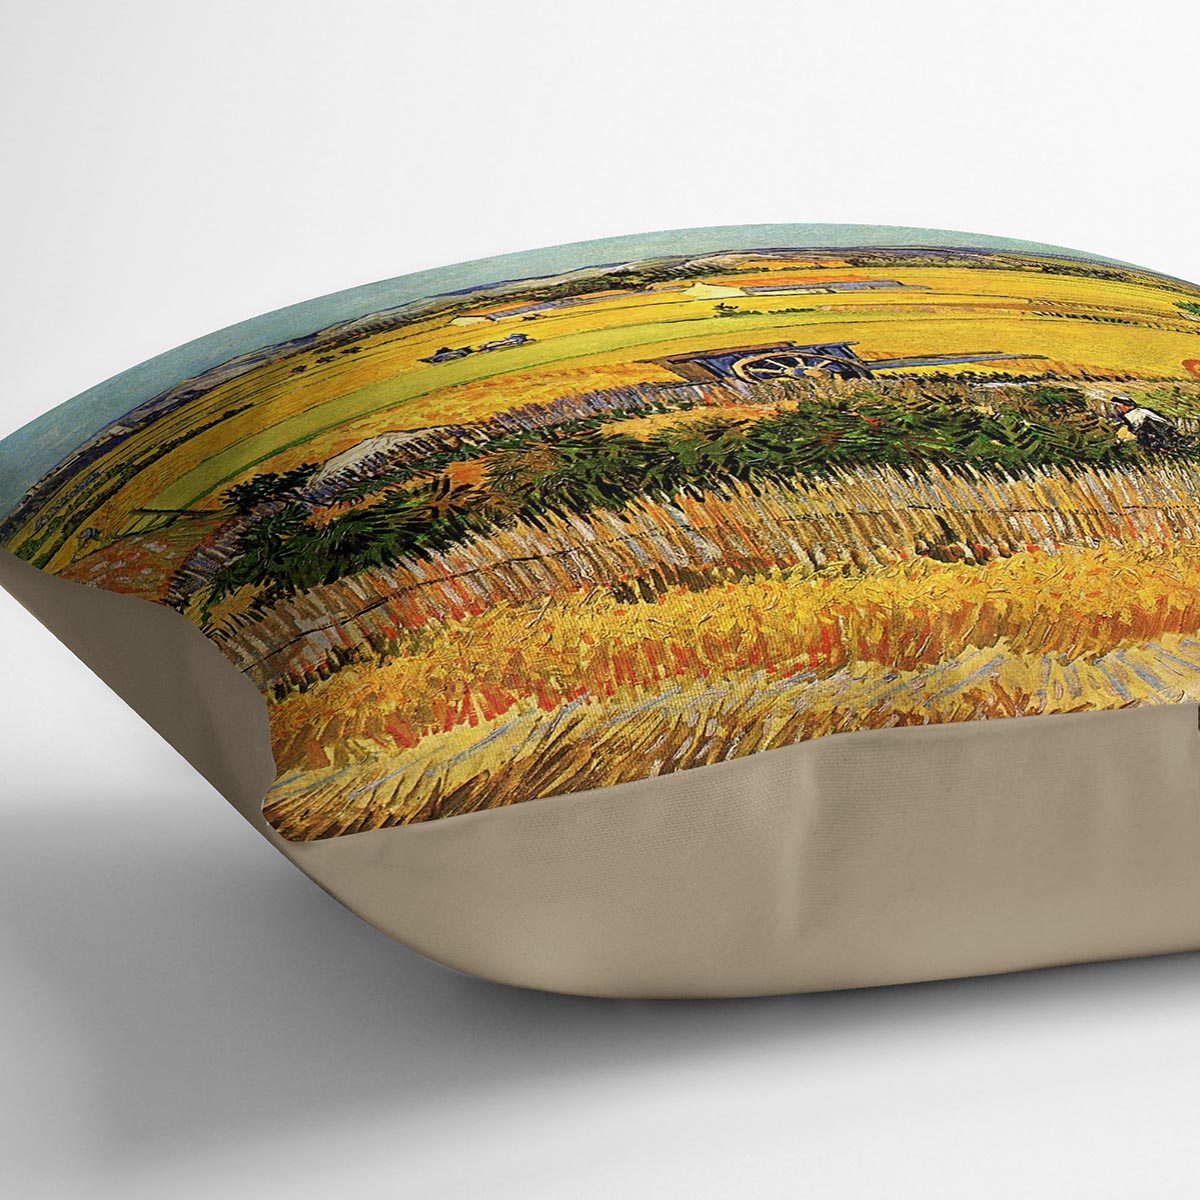 Harvest at La Crau with Montmajour in the Background by Van Gogh Cushion